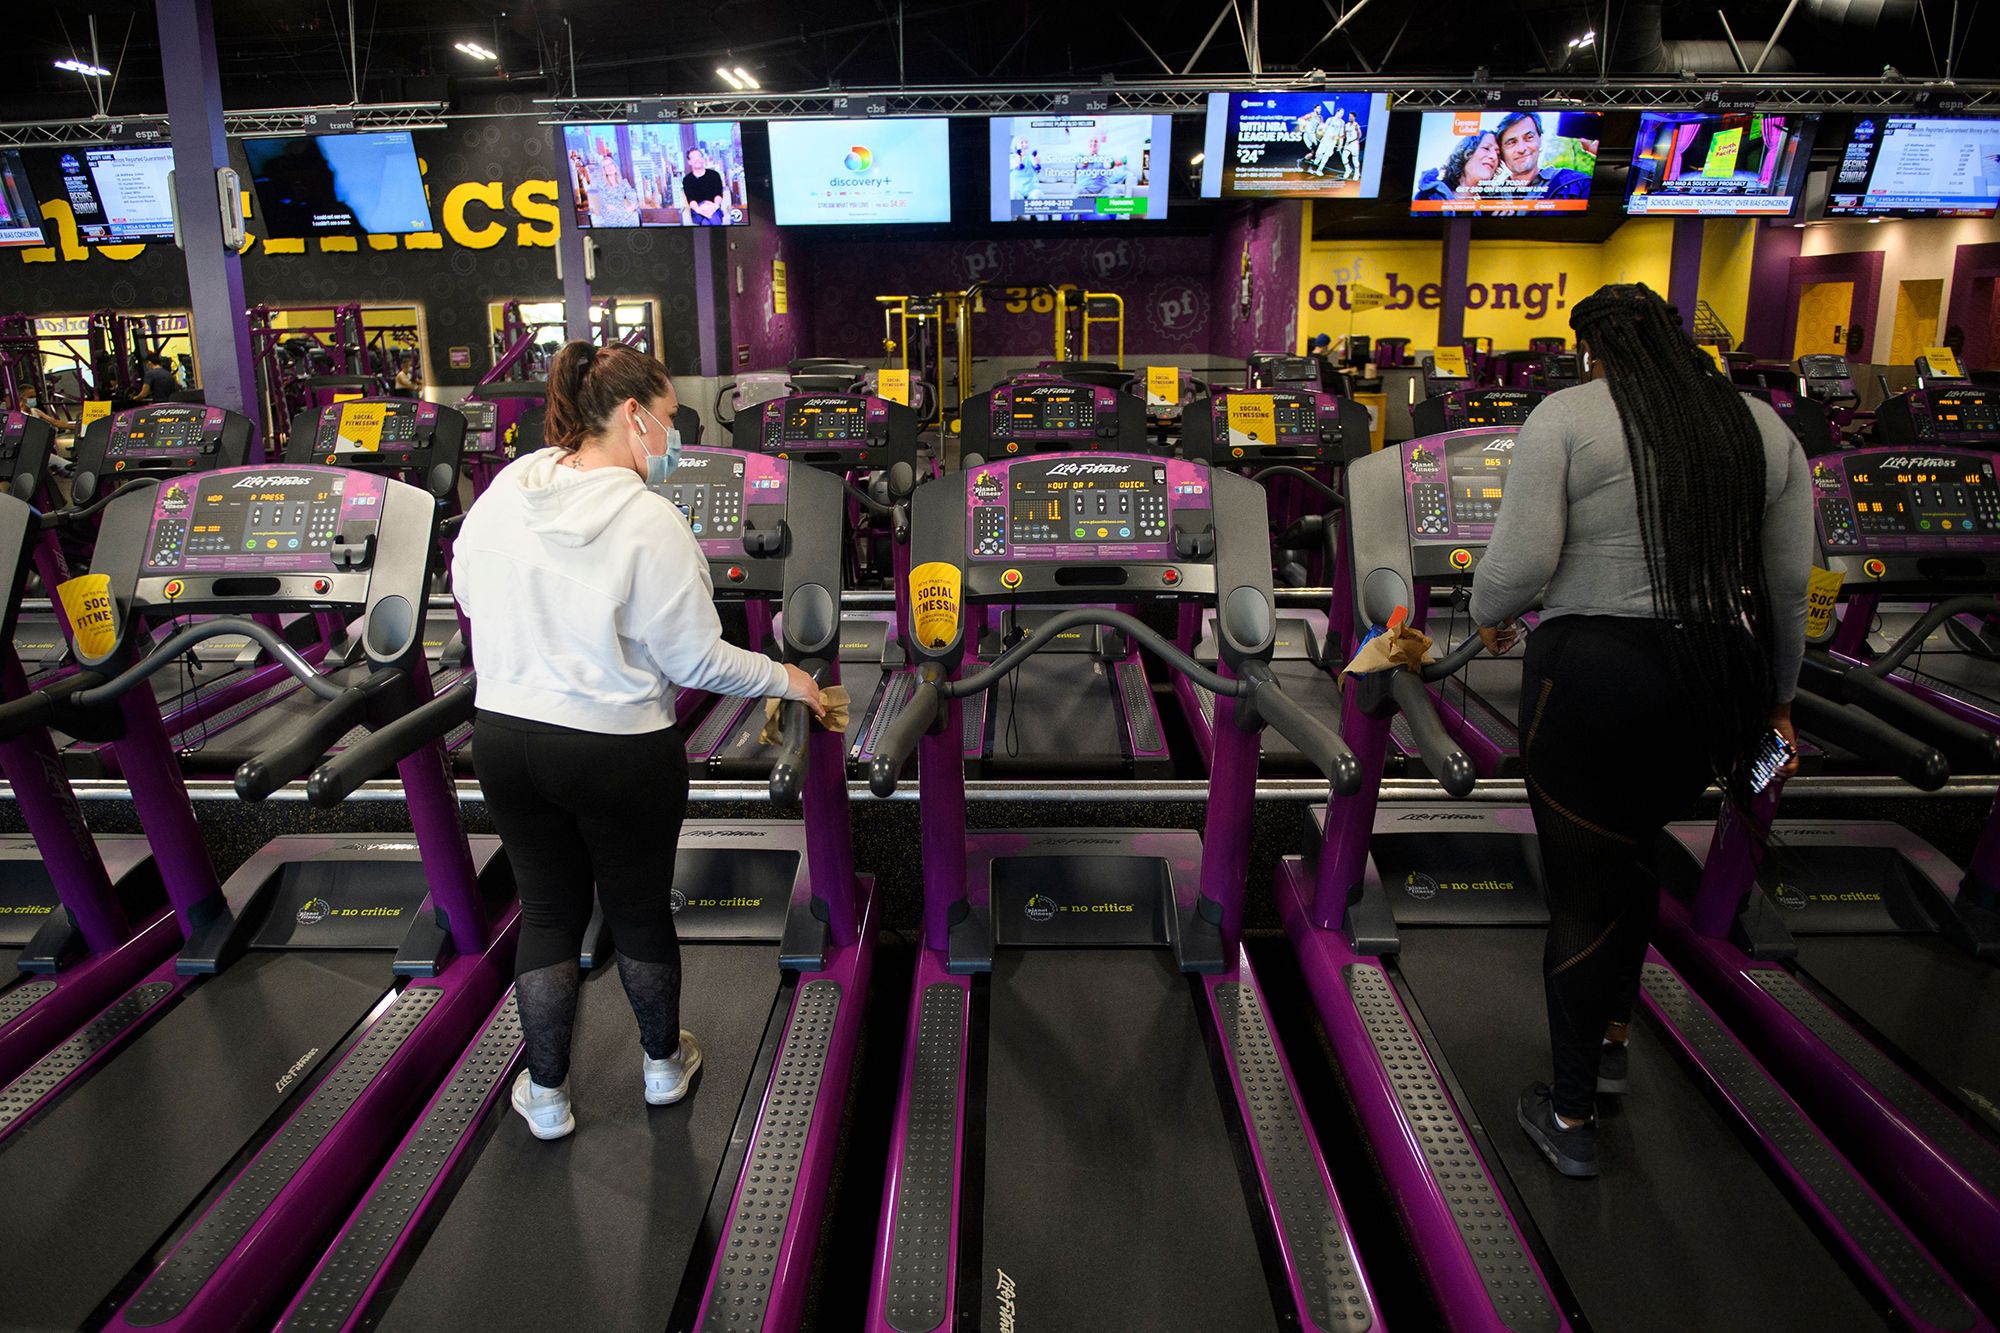 planet fitness near me 24 hours